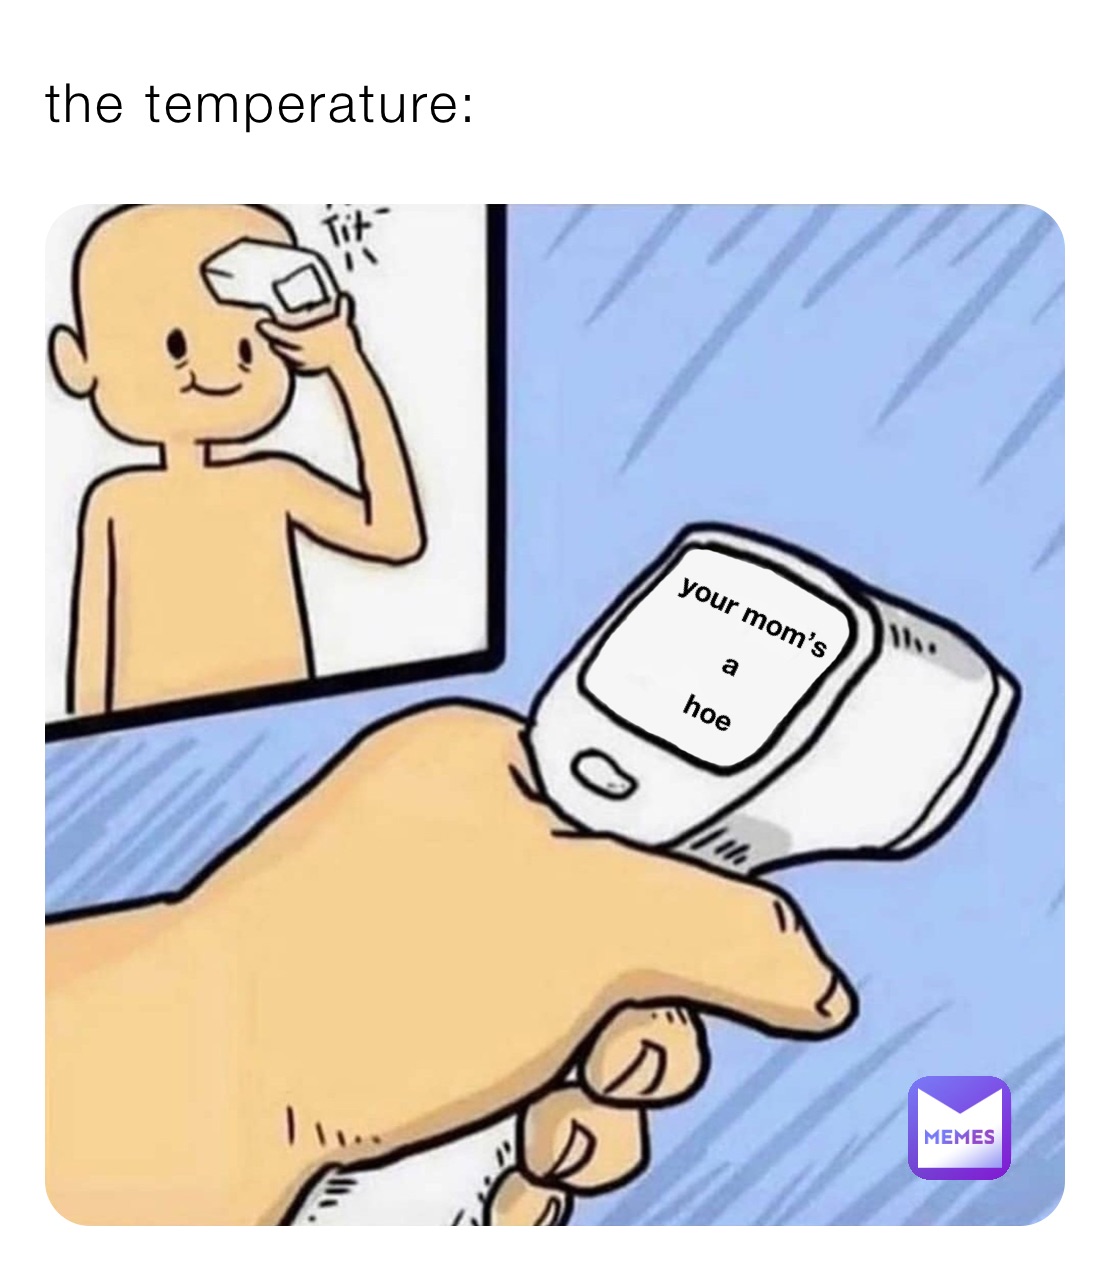 the temperature yale_101 Memes